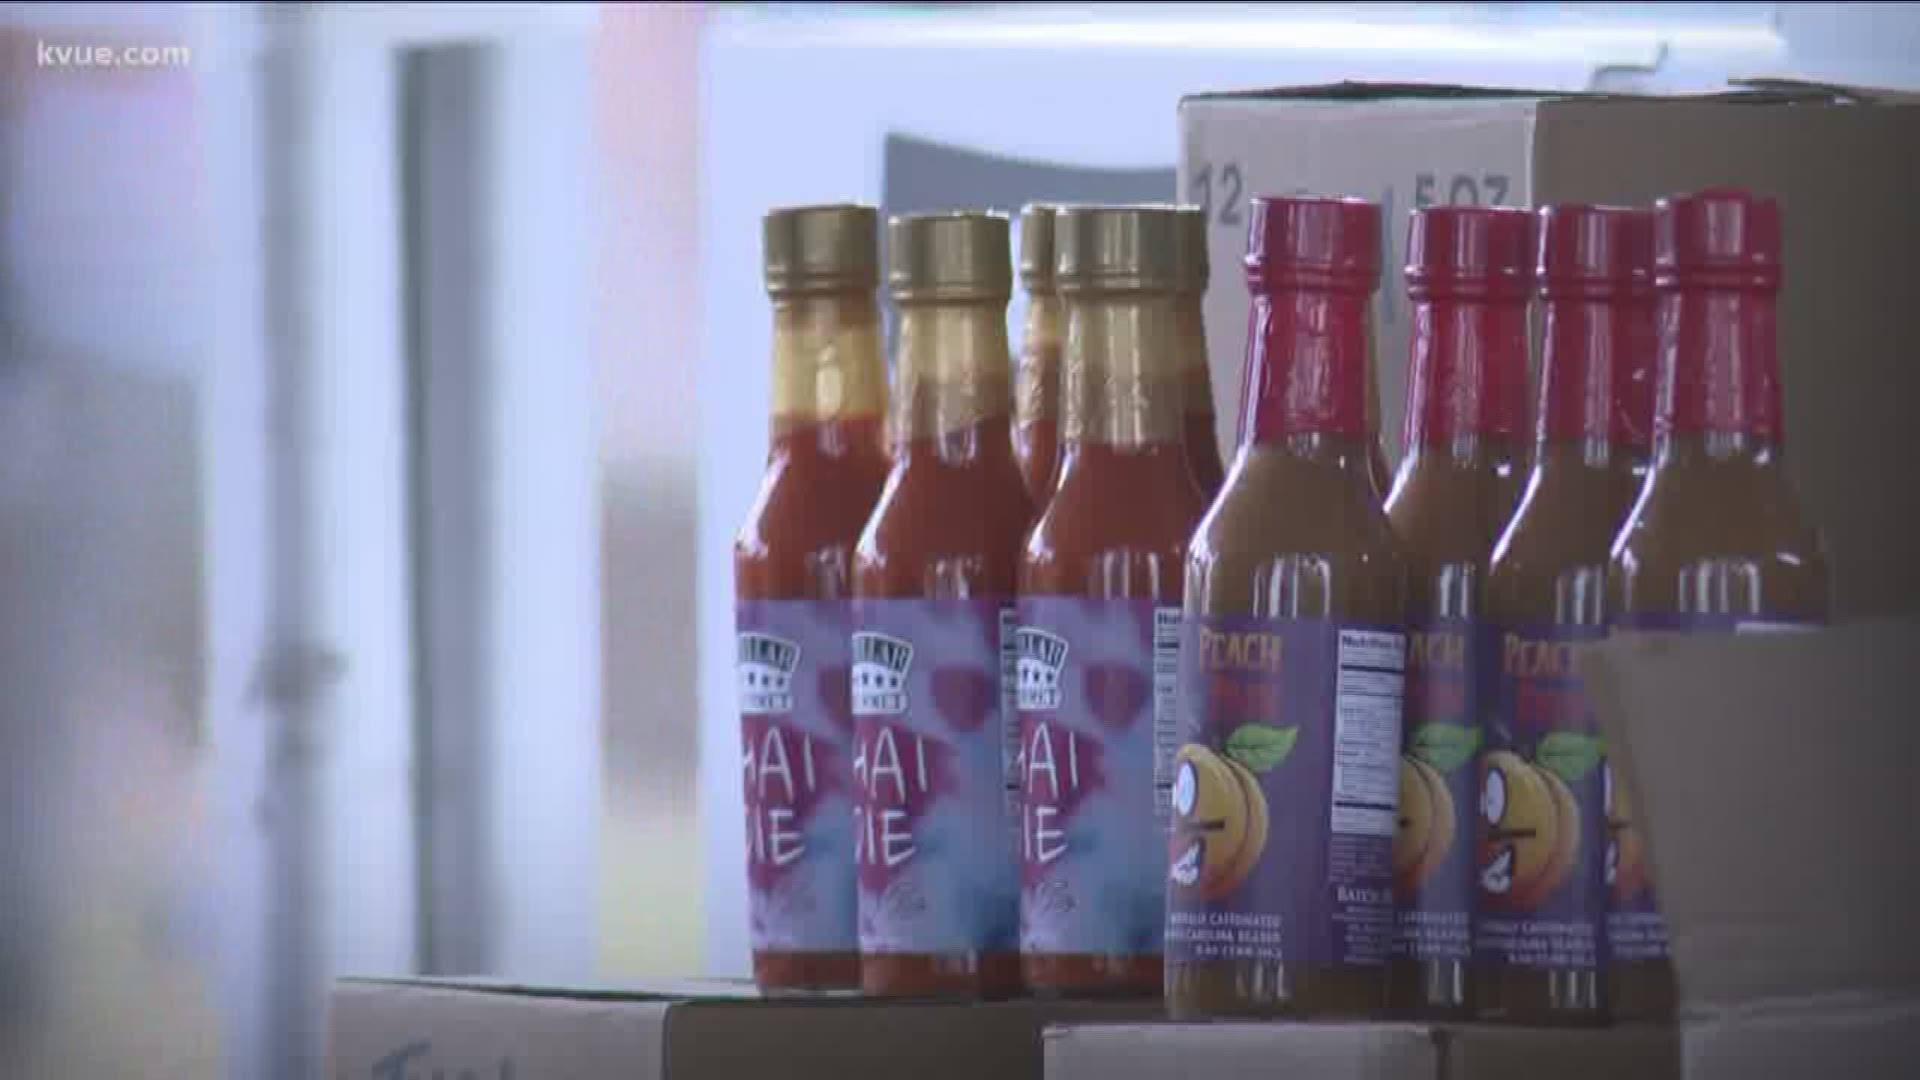 Many Austinites braved the heat Sunday for the Austin Chronicle's annual Hot Sauce Festival at Fiesta Gardens.